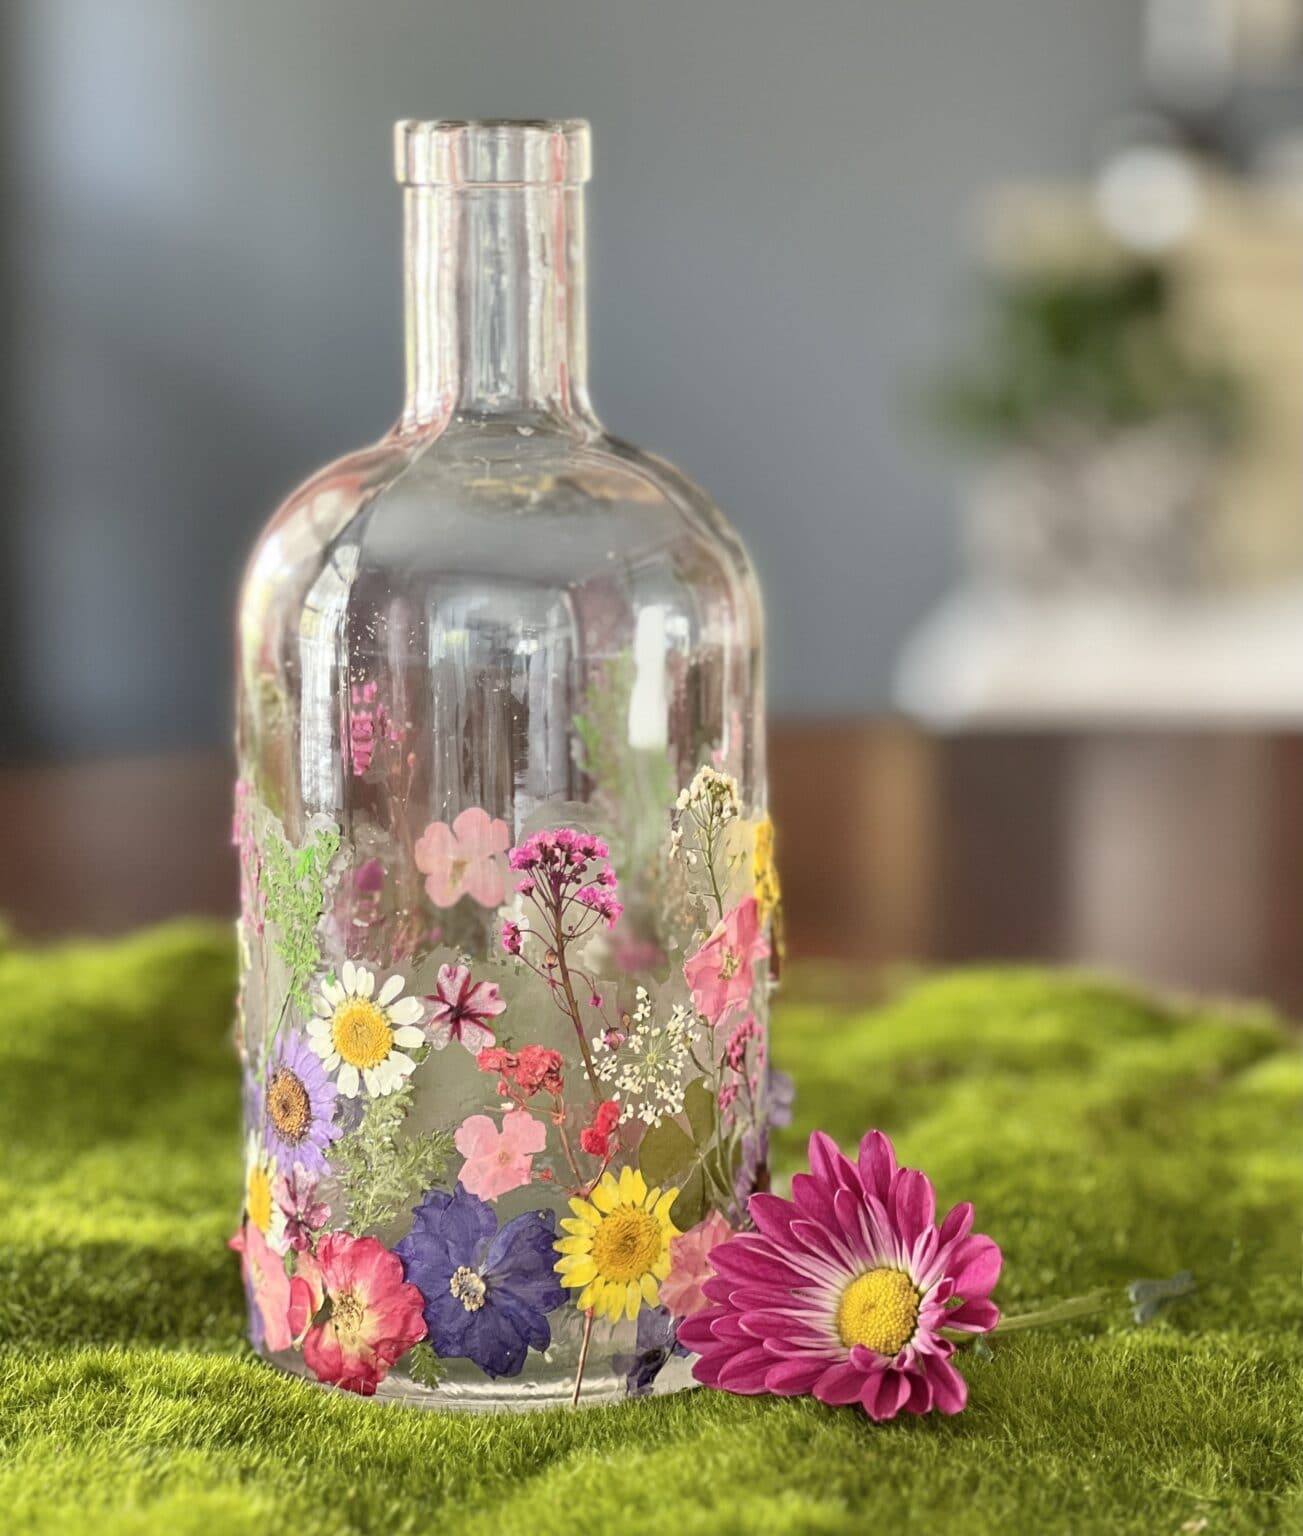 tuesday turn about 202 floral gala pressed flower vase sitting on grass with daisy on the side